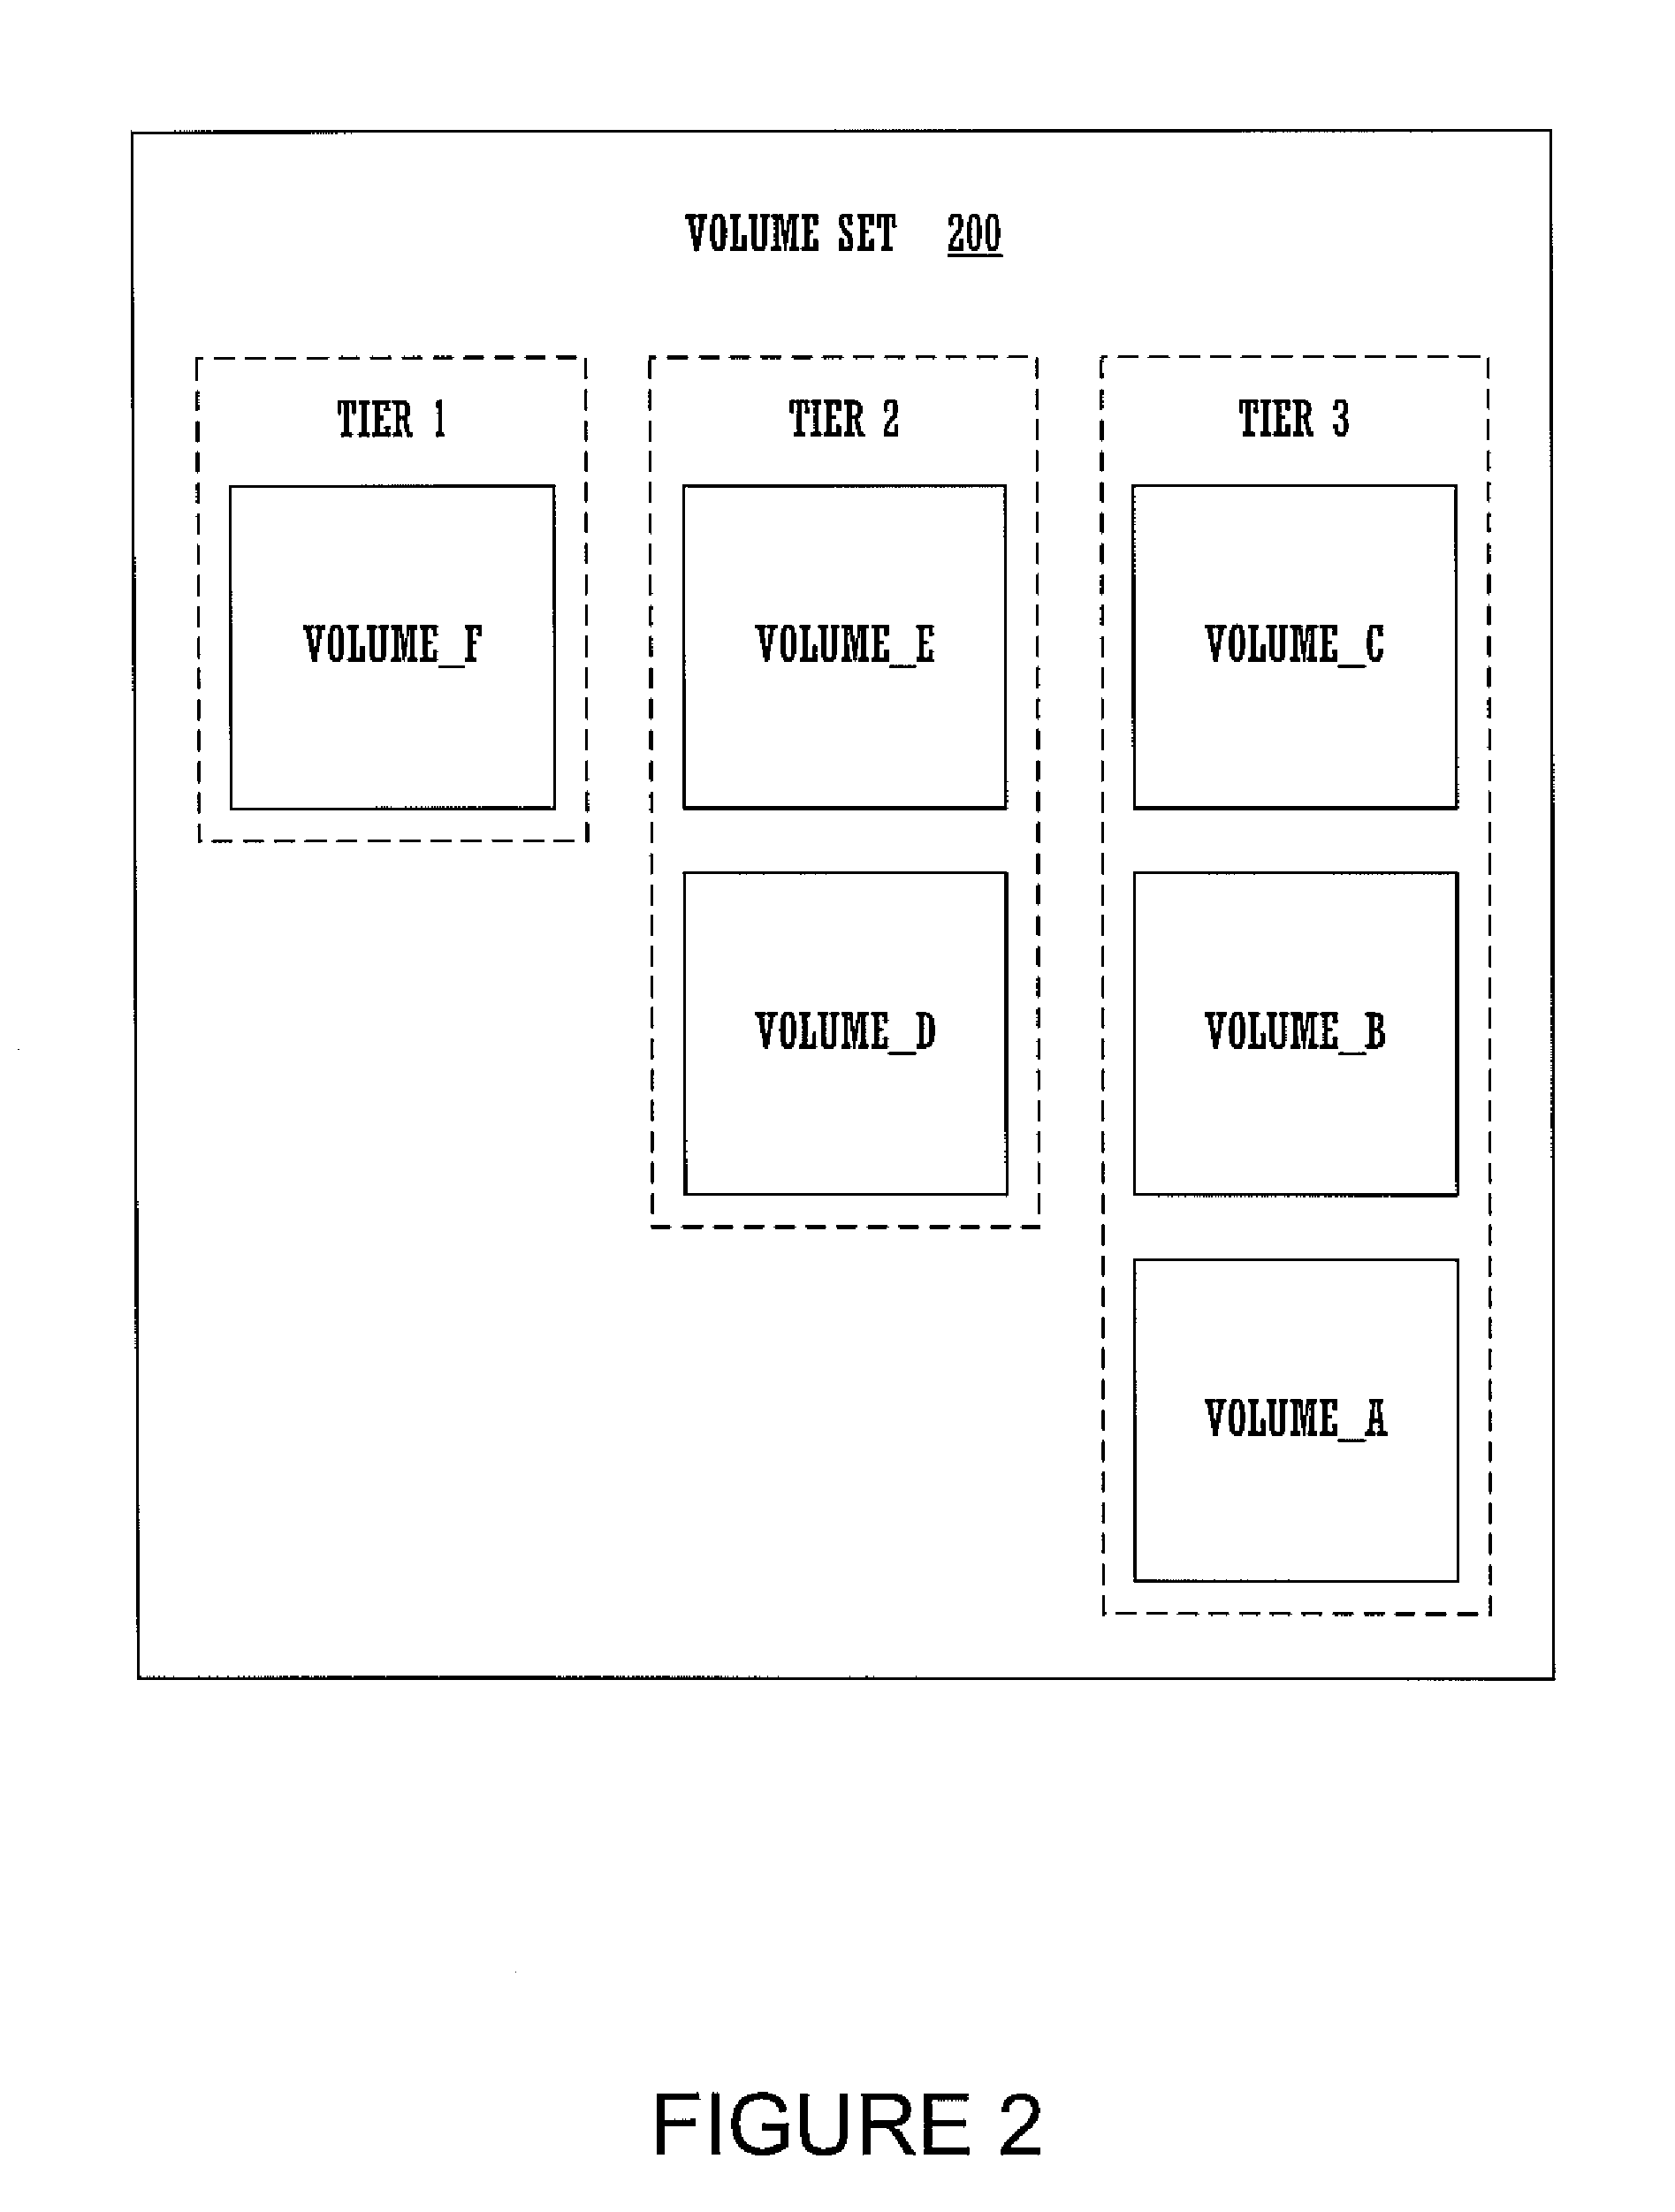 Method for quickly identifying data residing on a volume in a multivolume file system